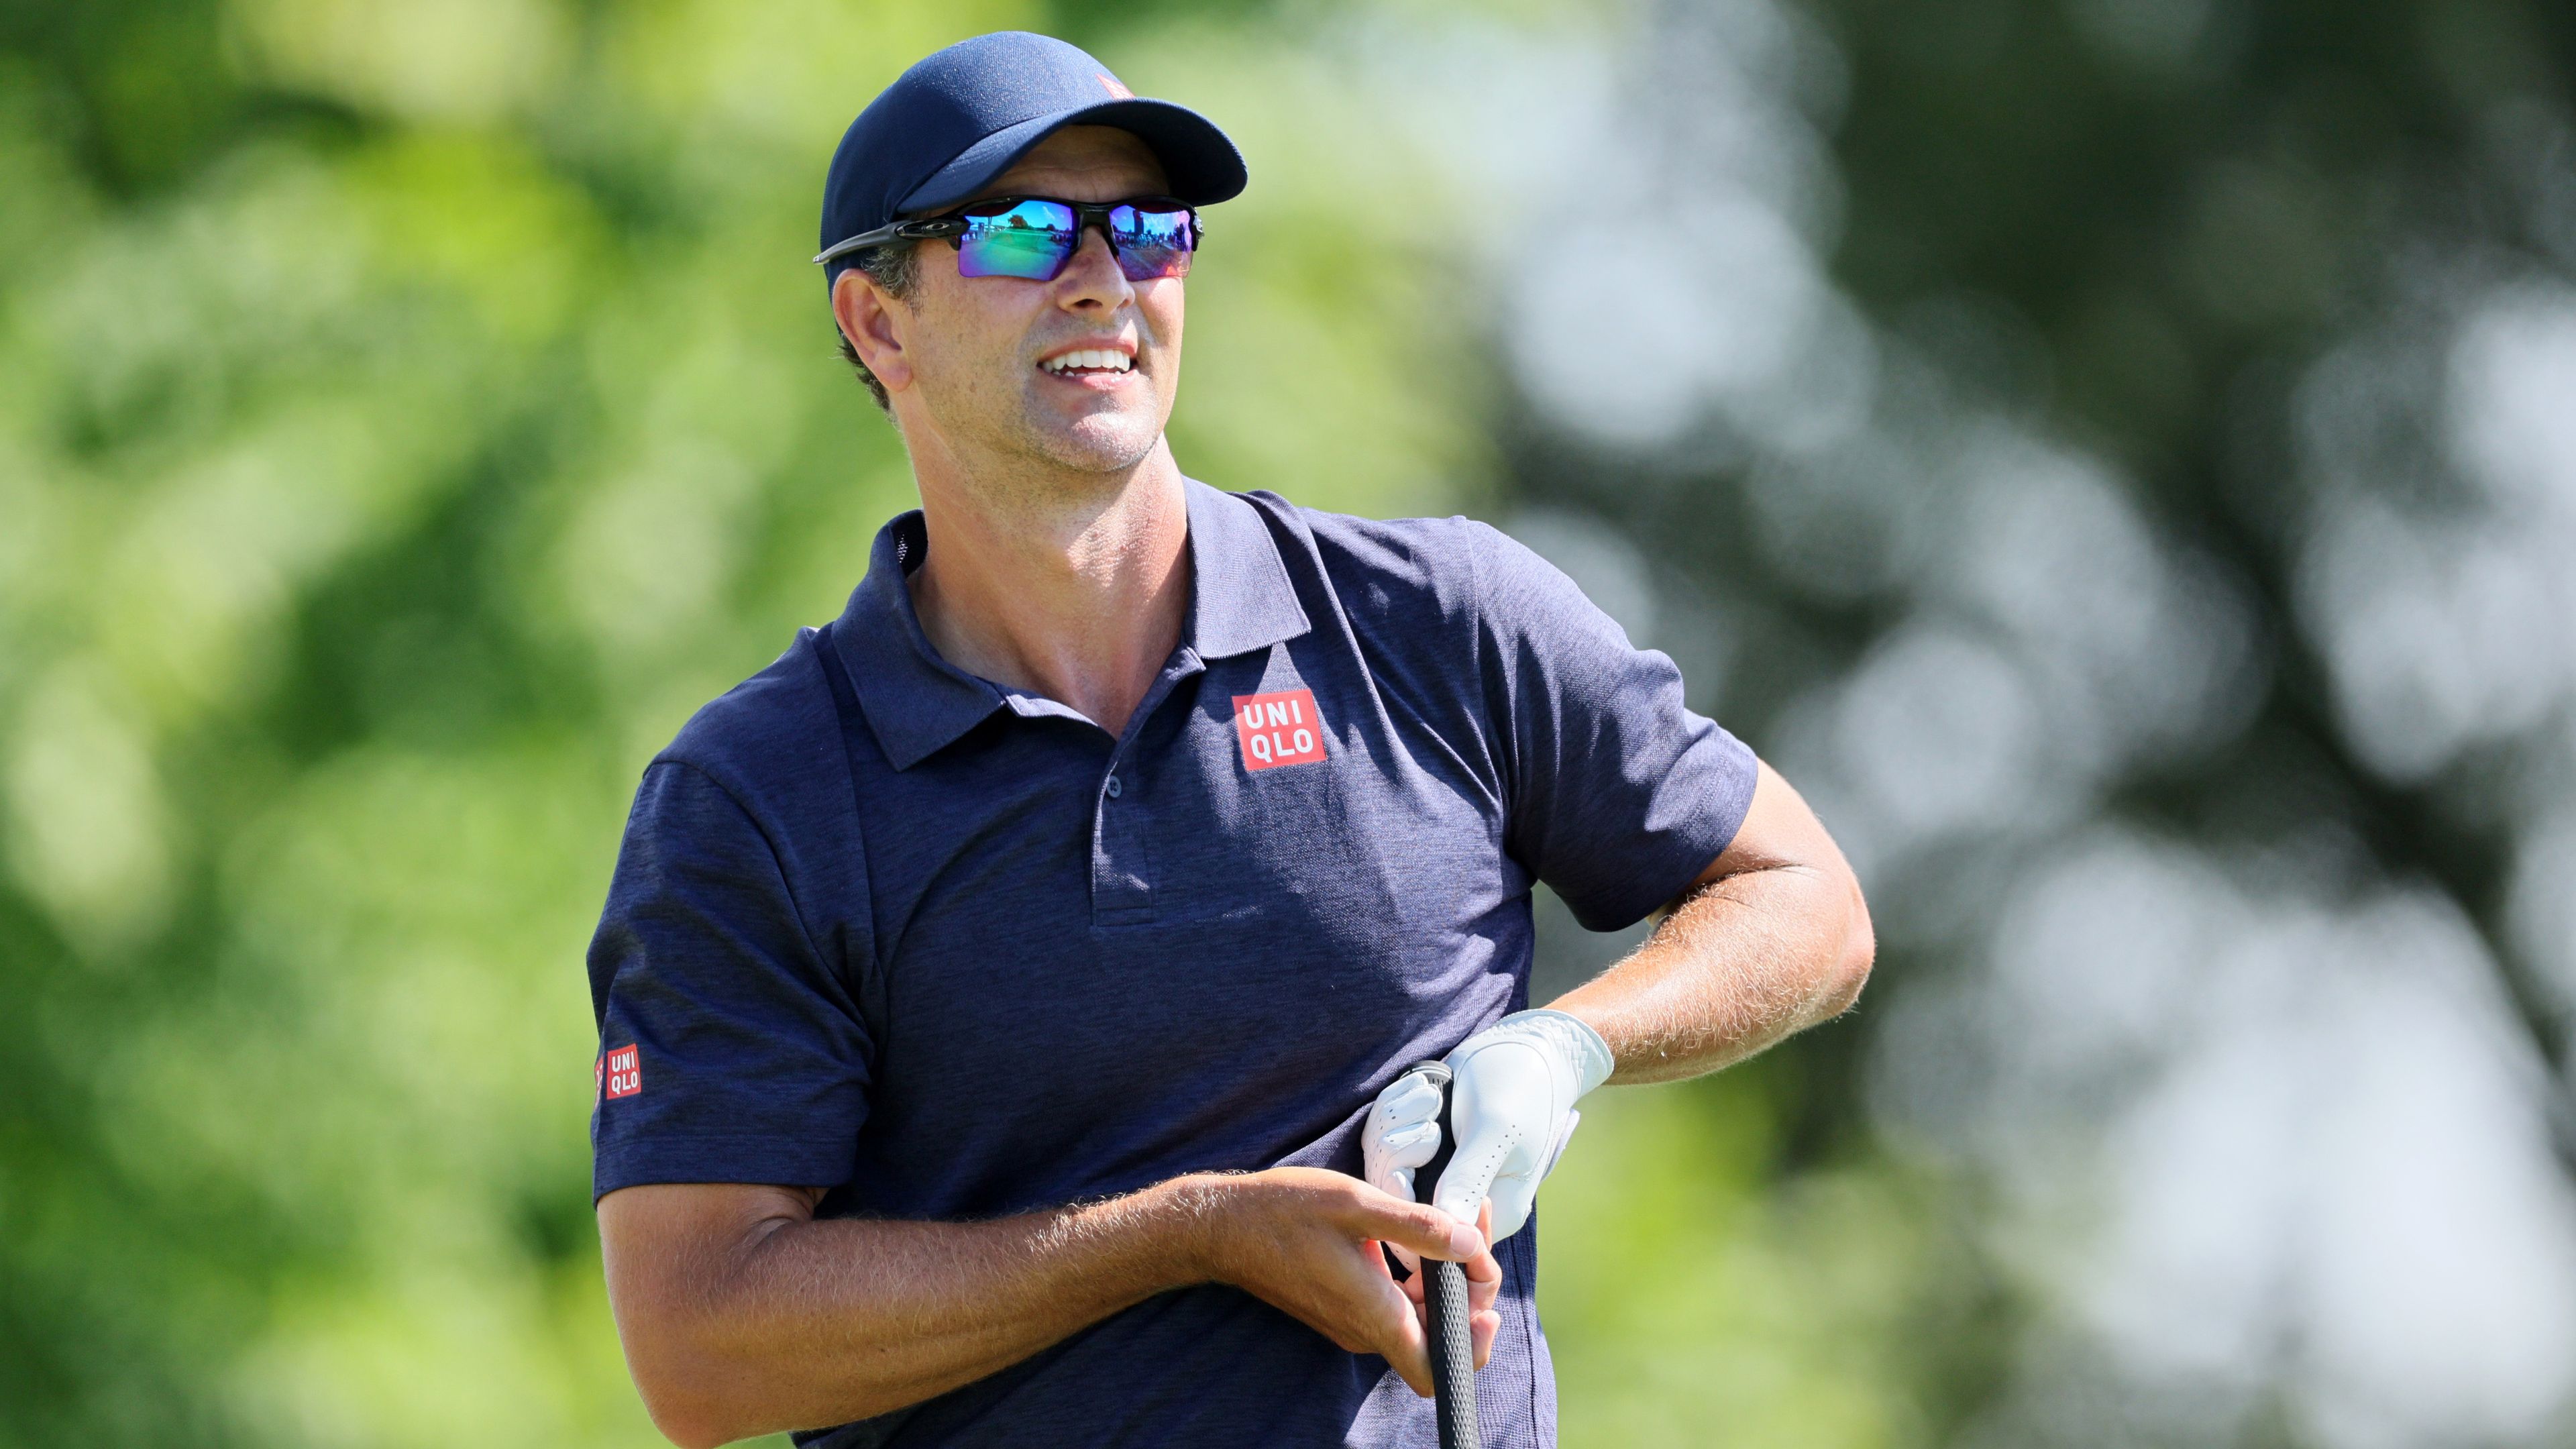 Adam Scott leads heading into weekend at BMW Championship